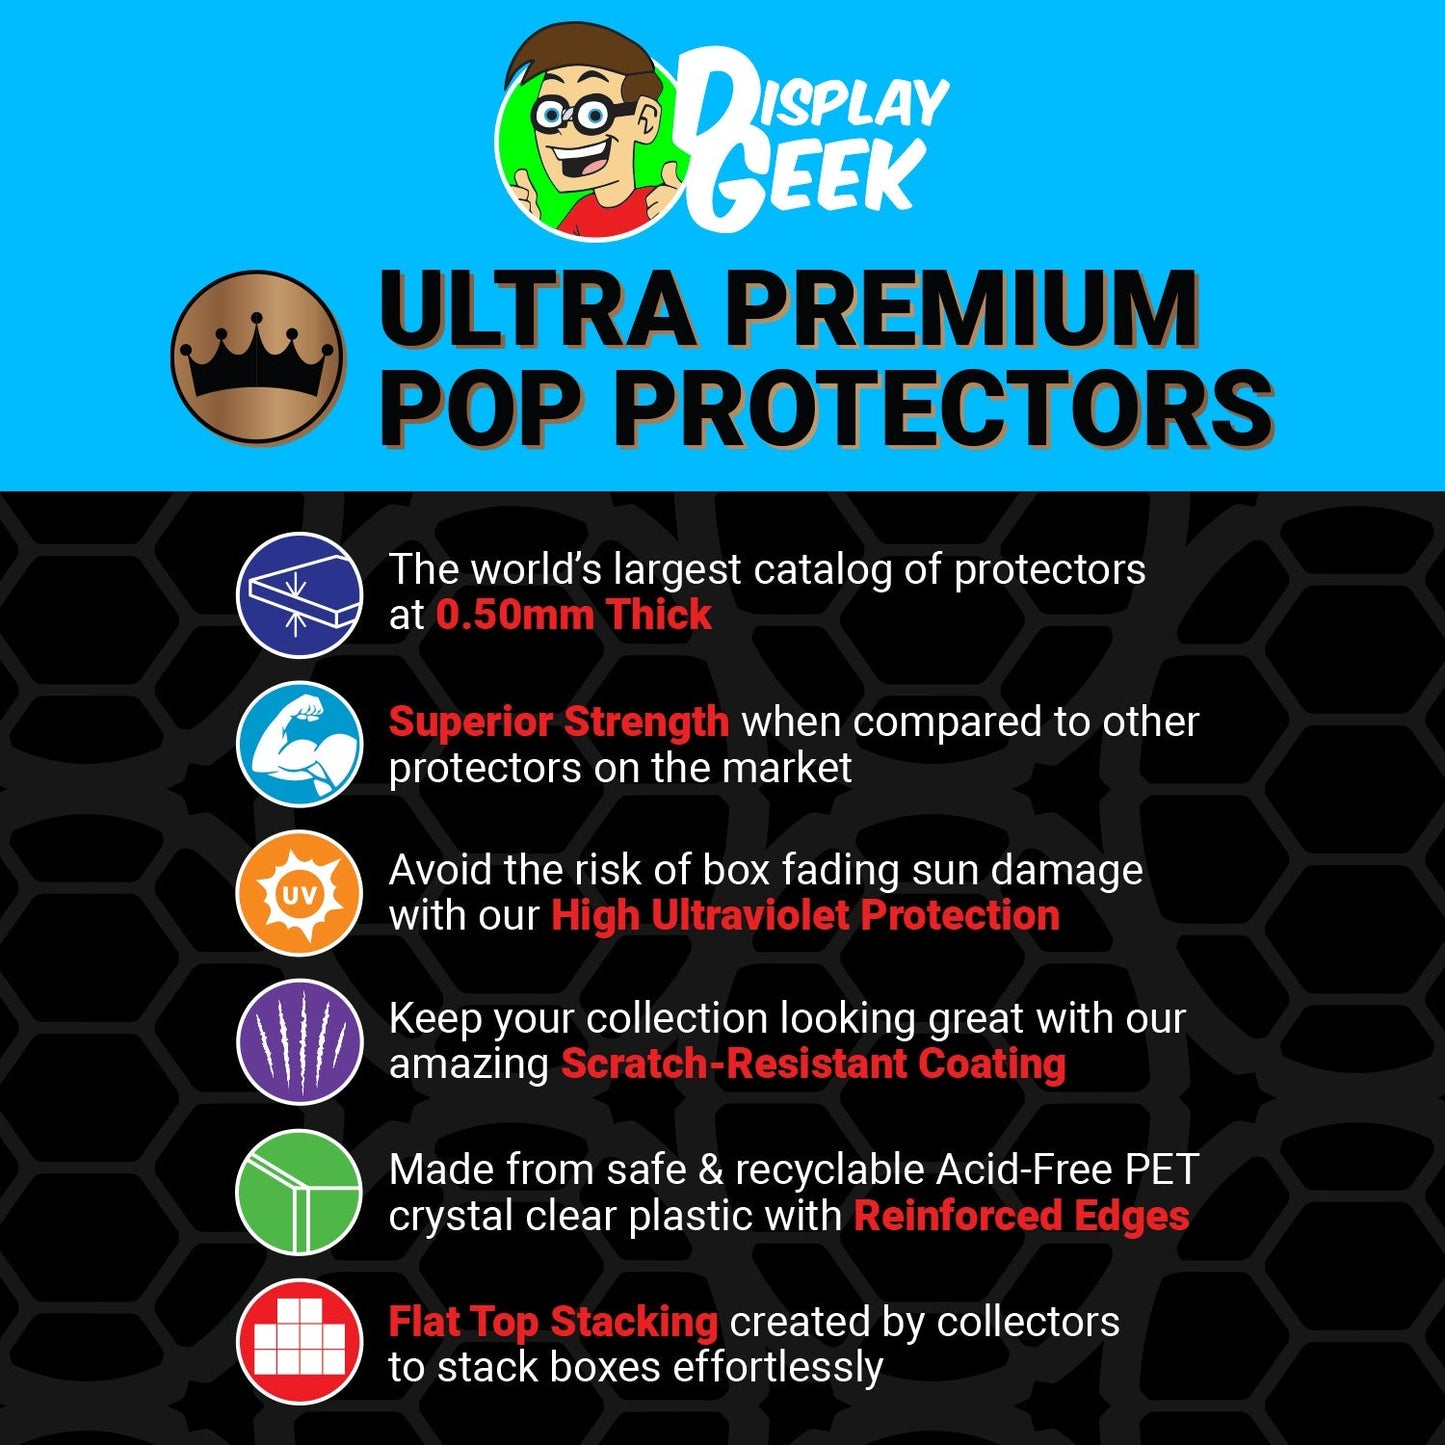 Pop Protector for Captain America #27 Funko Pop Comic Covers - PPG Pop Protector Guide Search Created by Display Geek